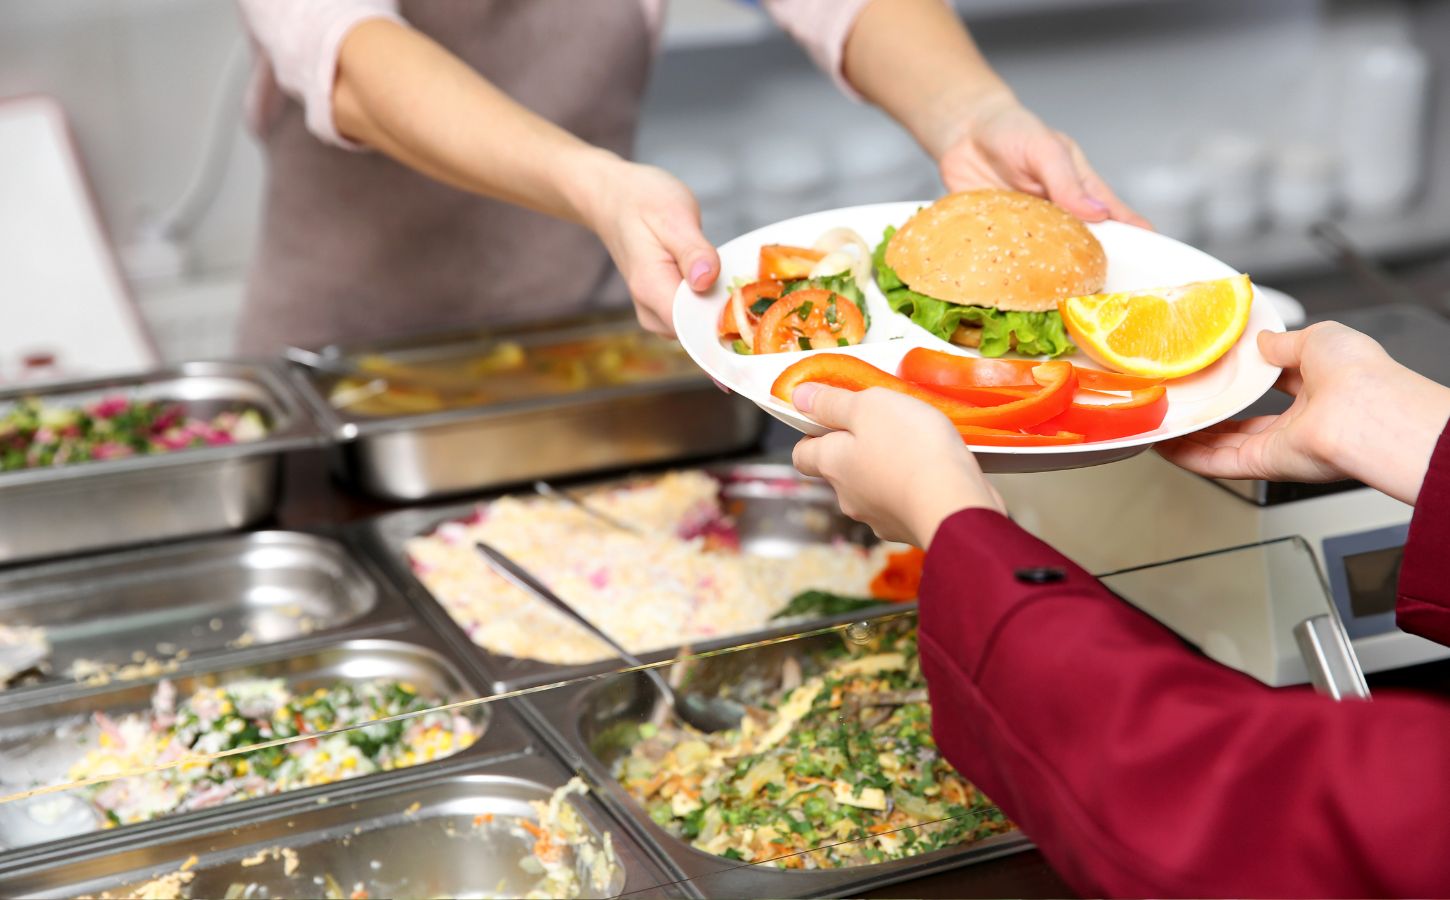 A school lunch worker handing a child a plant-based meal